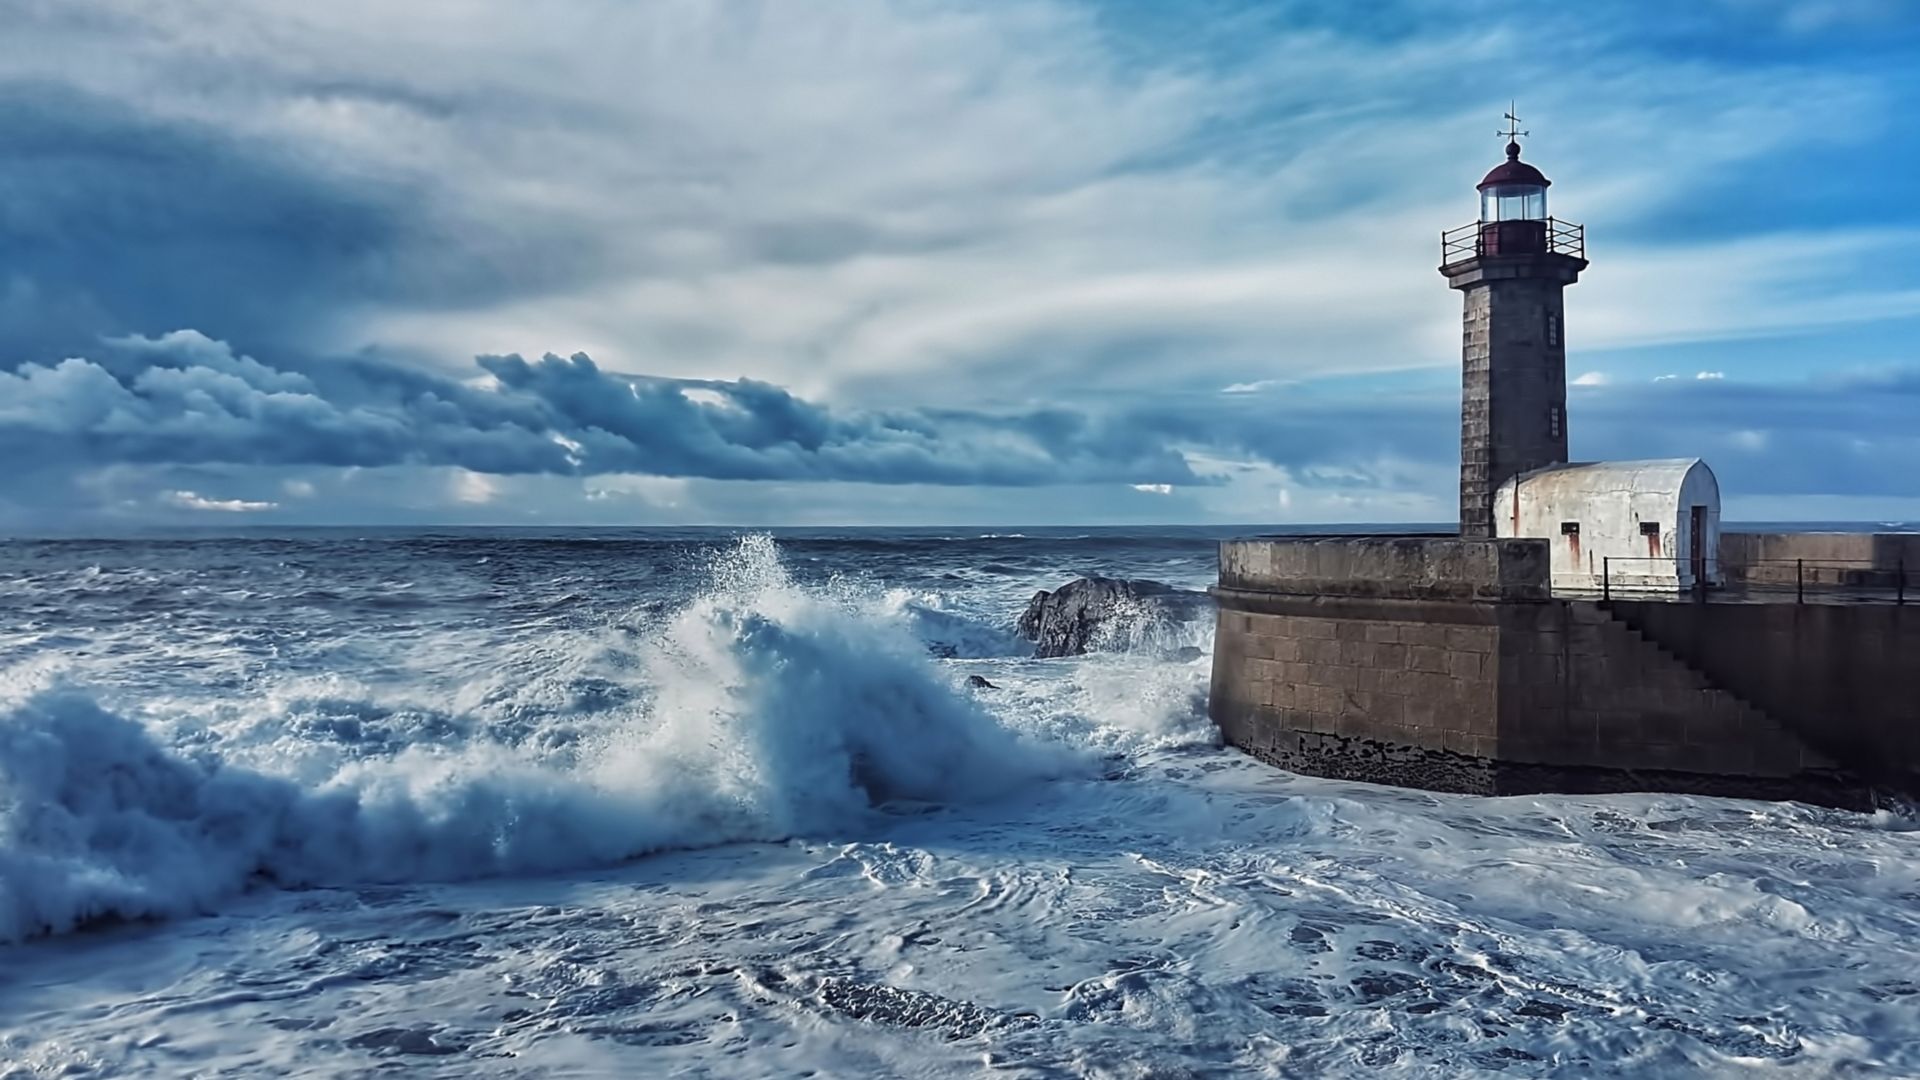 Lighthouse at sea with waves crashing and clouds